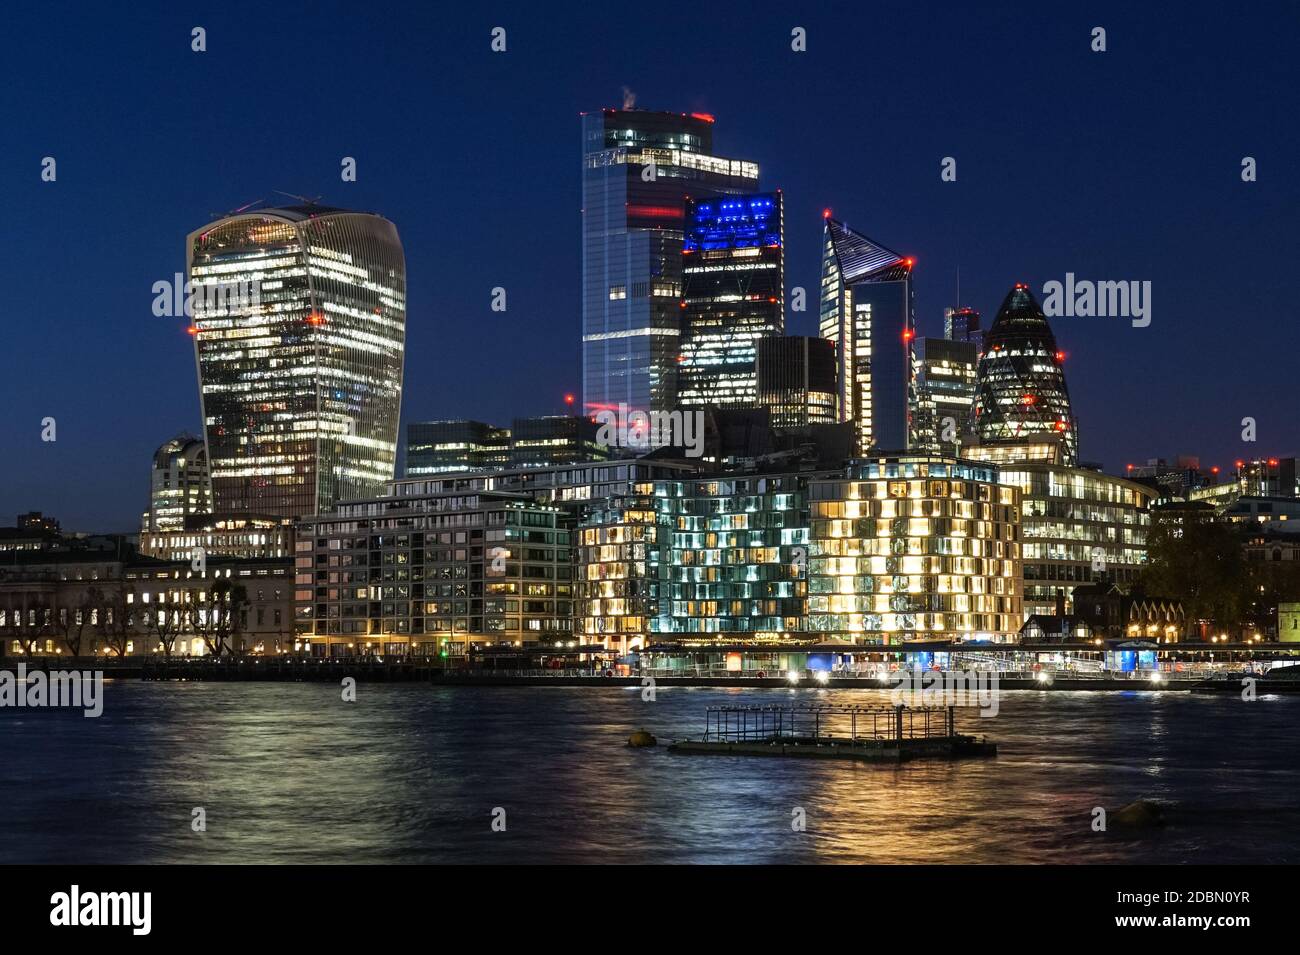 The City of London at Night, Londres Angleterre Royaume-Uni Banque D'Images